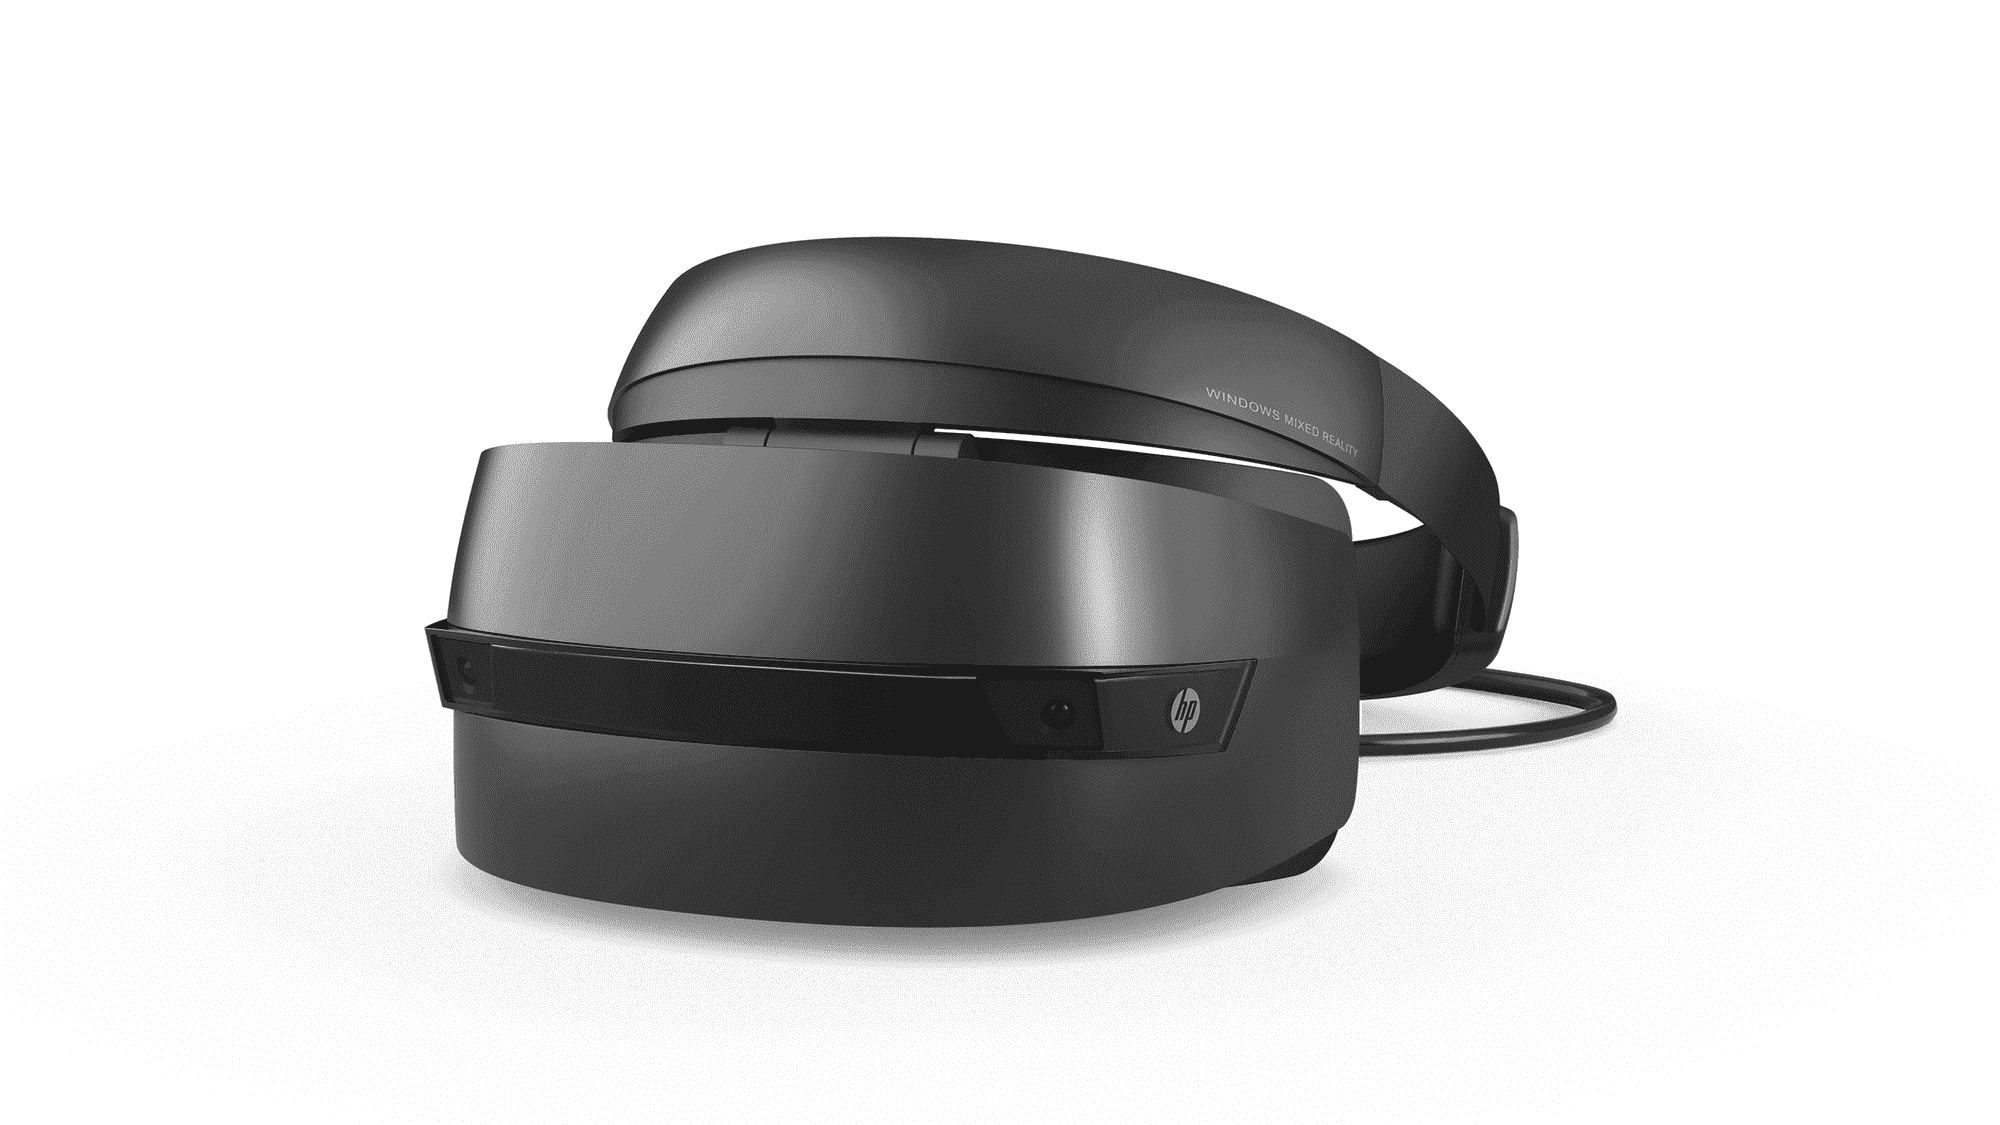 Samsung HMD Odyssey+ Windows Mixed Reality headset spotted online d7c3becea8d4fba1dfcc8d661db47f0c.png